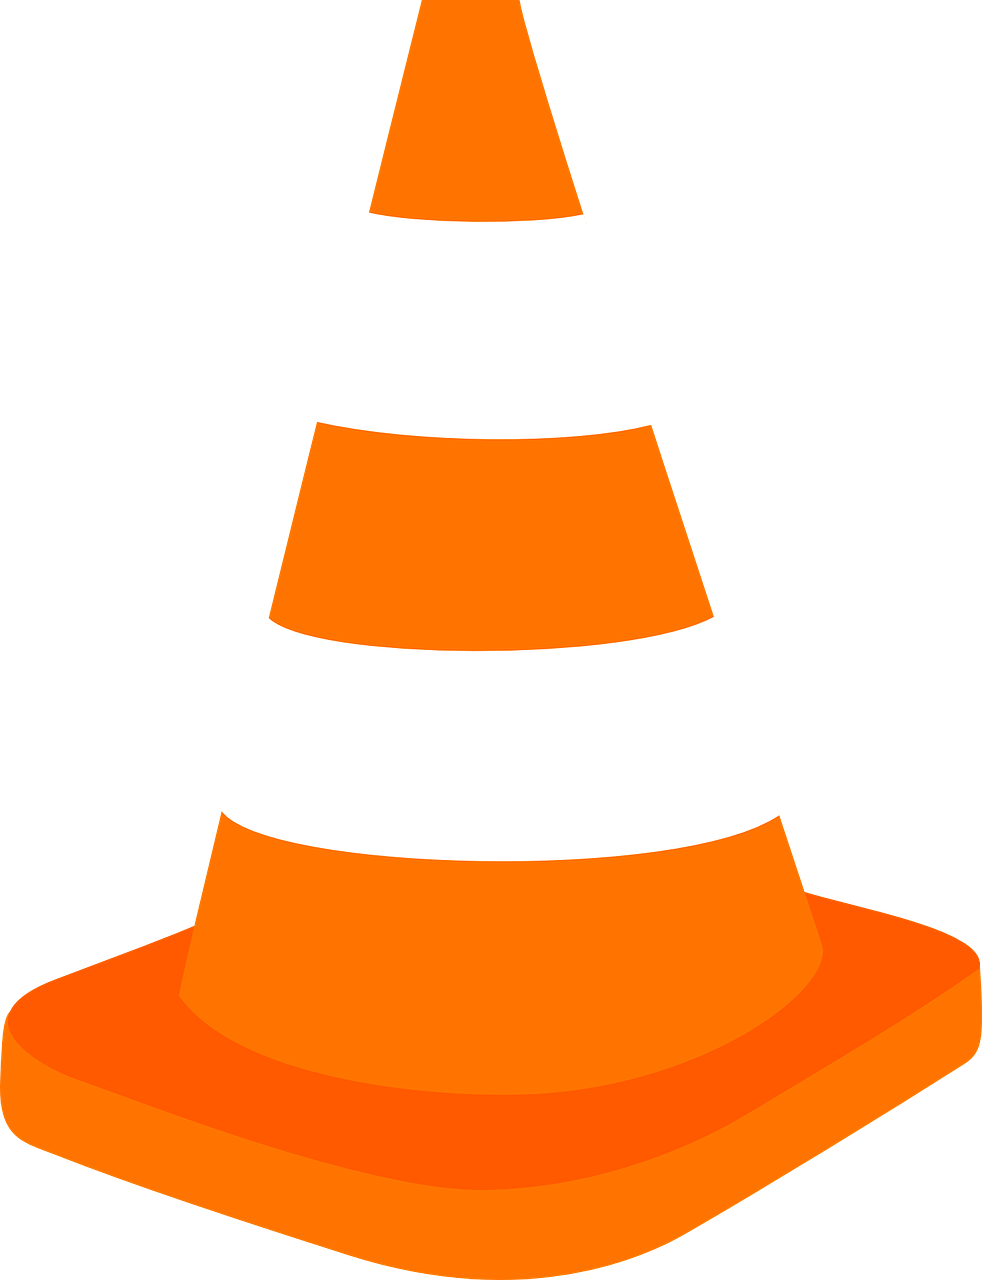 cone collective protection signaling free photo